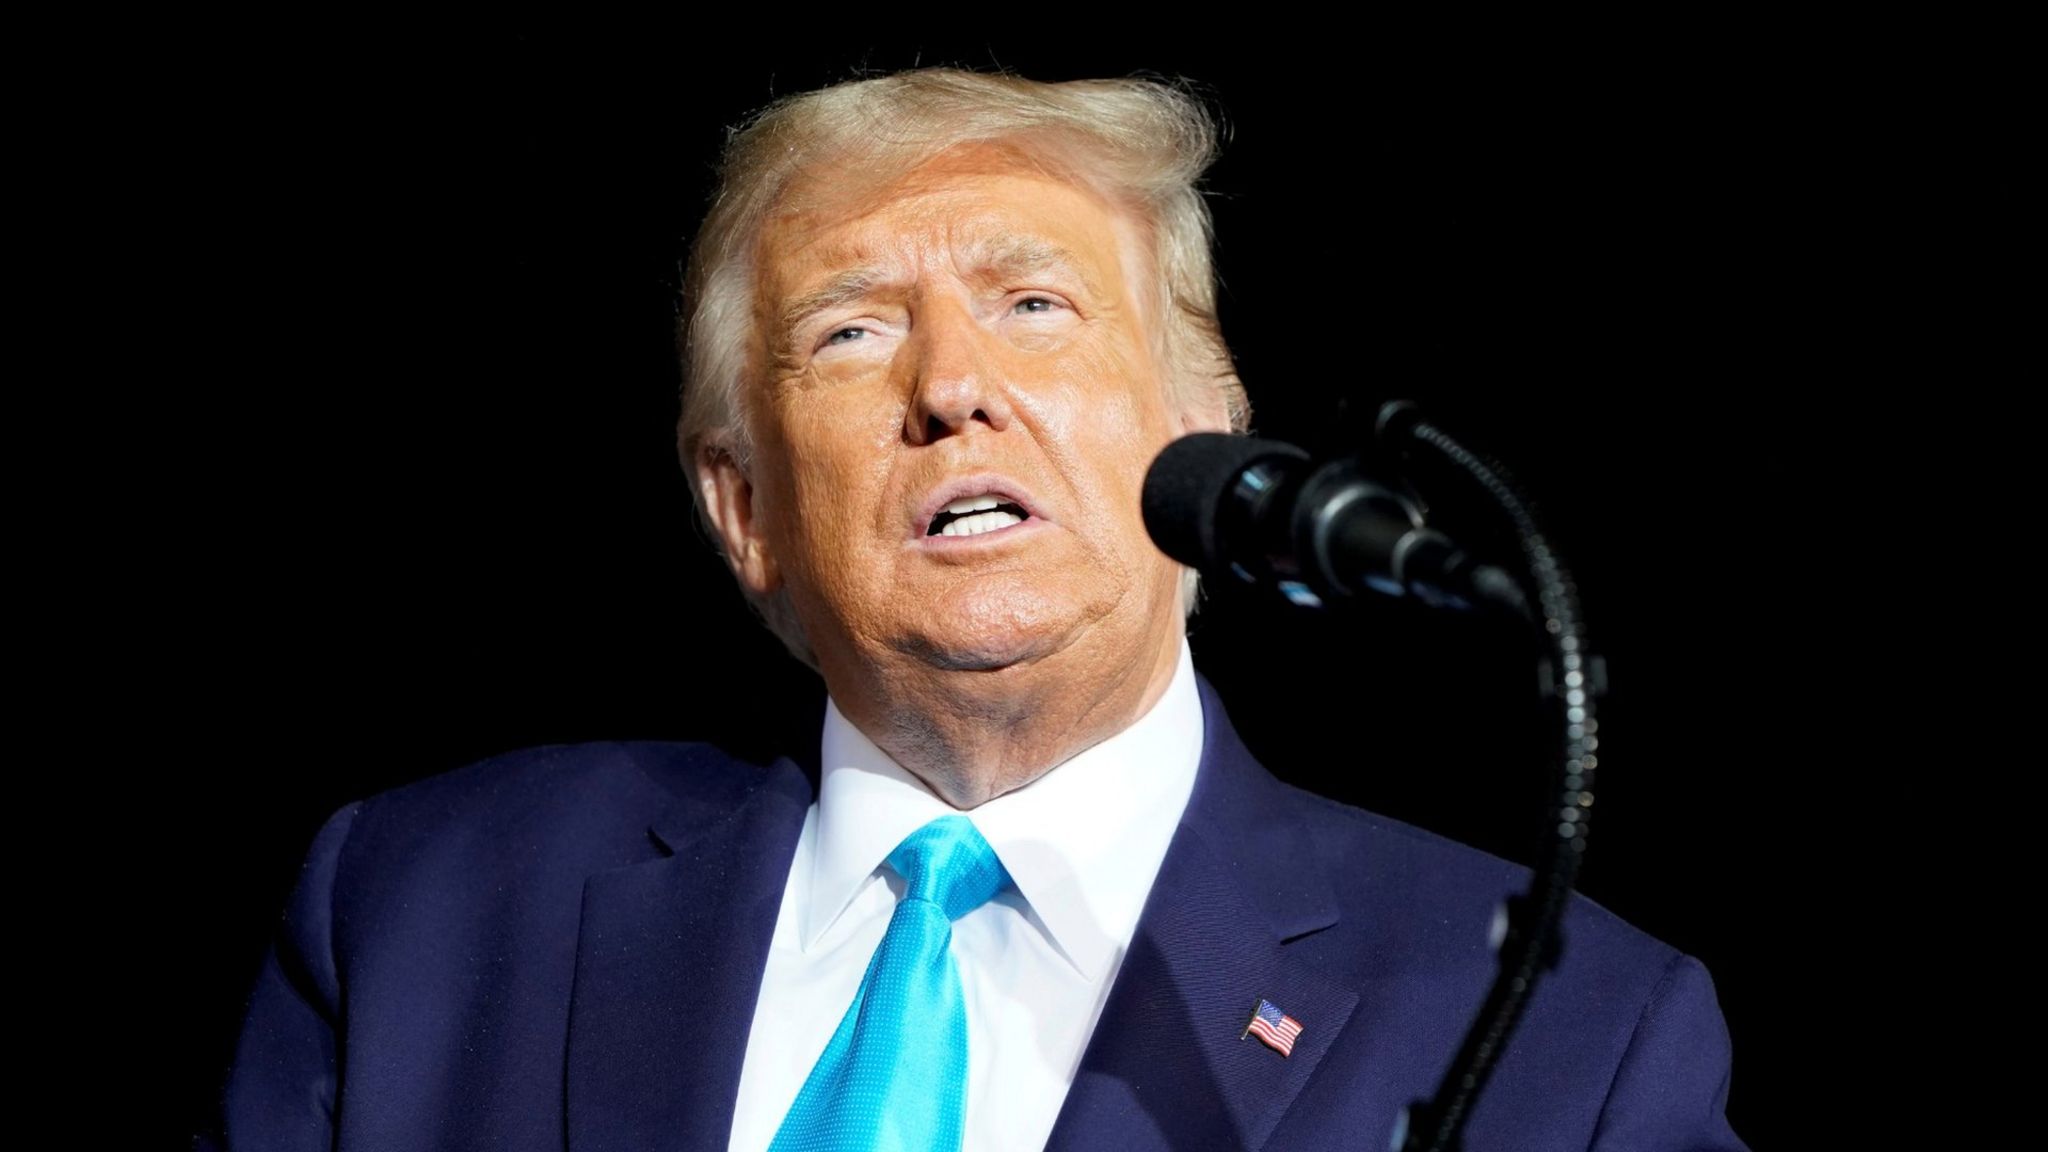 US President Donald Trump speaks during a campaign event in Pennsylvania on 26 September 2020